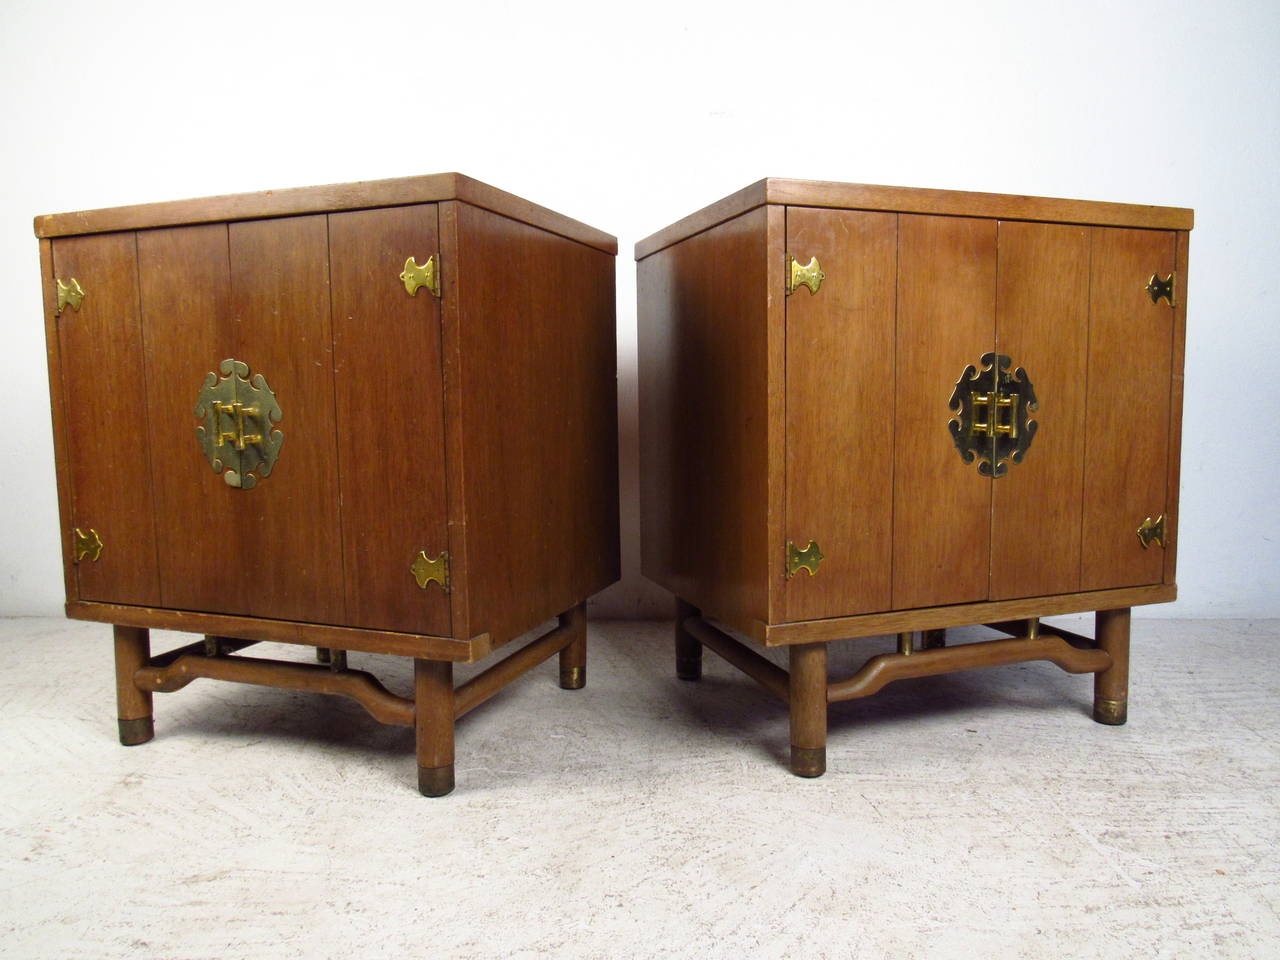 20th Century Pair of Mid-Century Modern End Tables with Ornate Brass Hardware